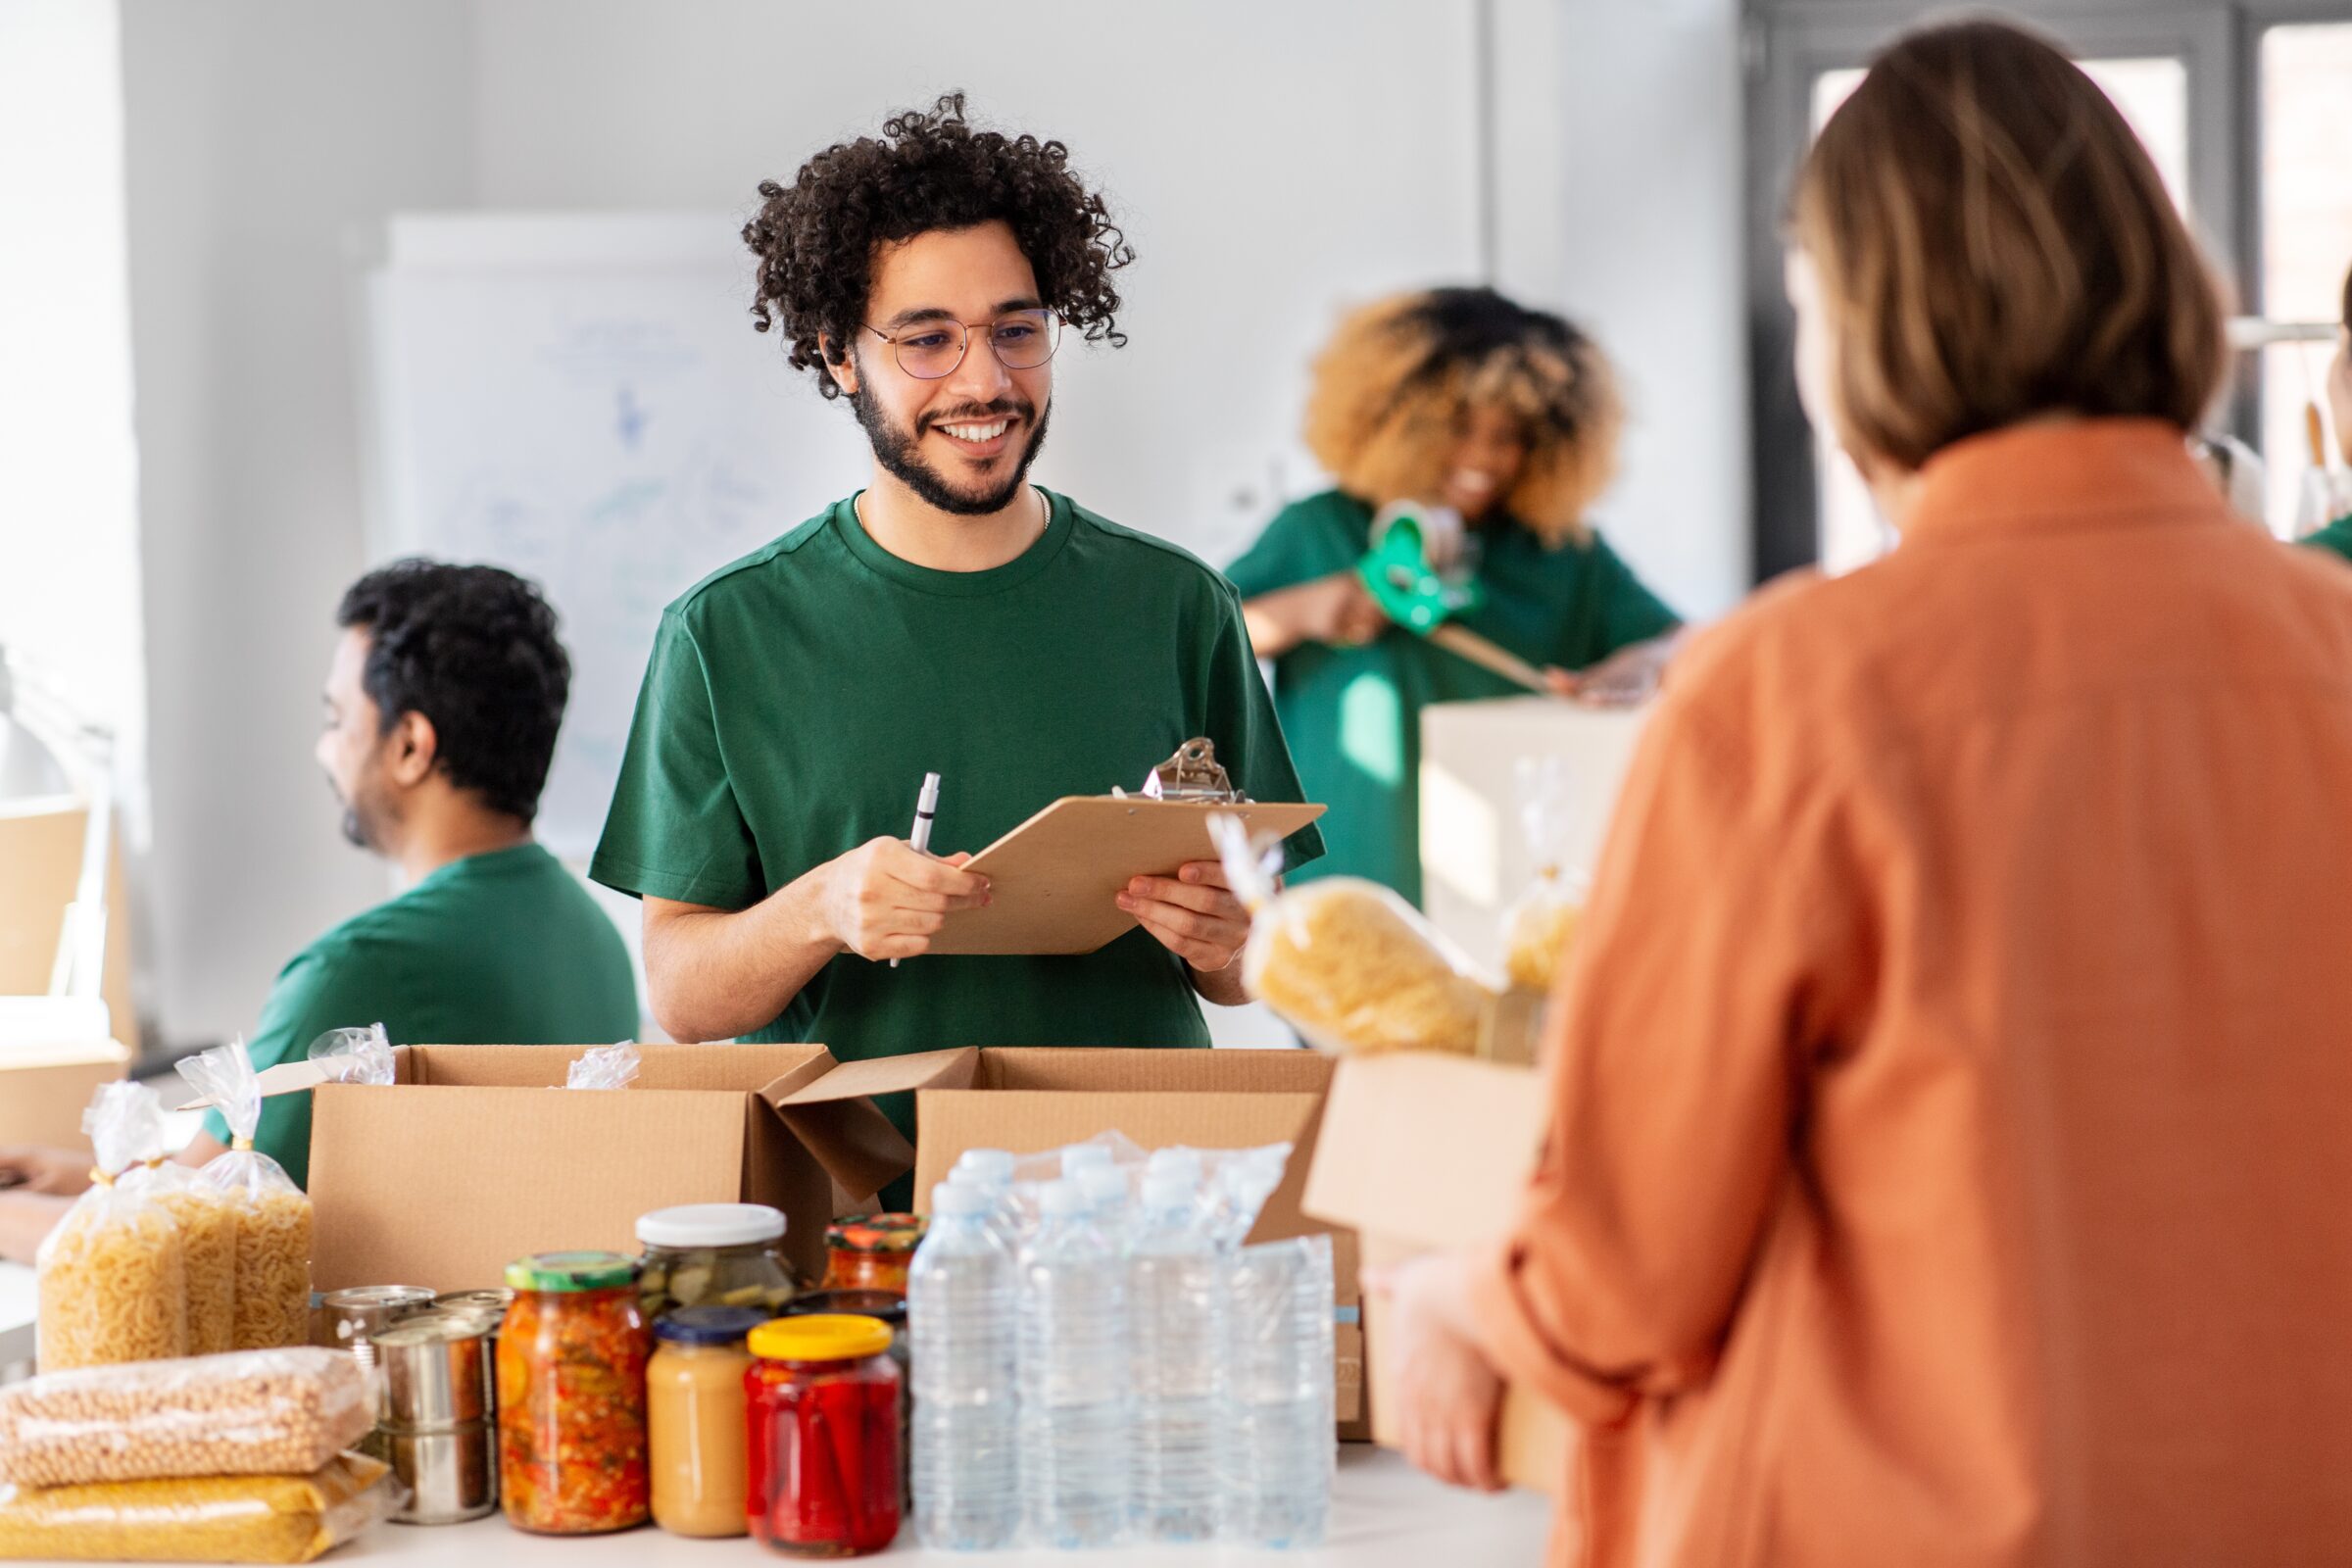 man with curly hair working at a nonprofit in Colorado with jars and food and boxes in front of him